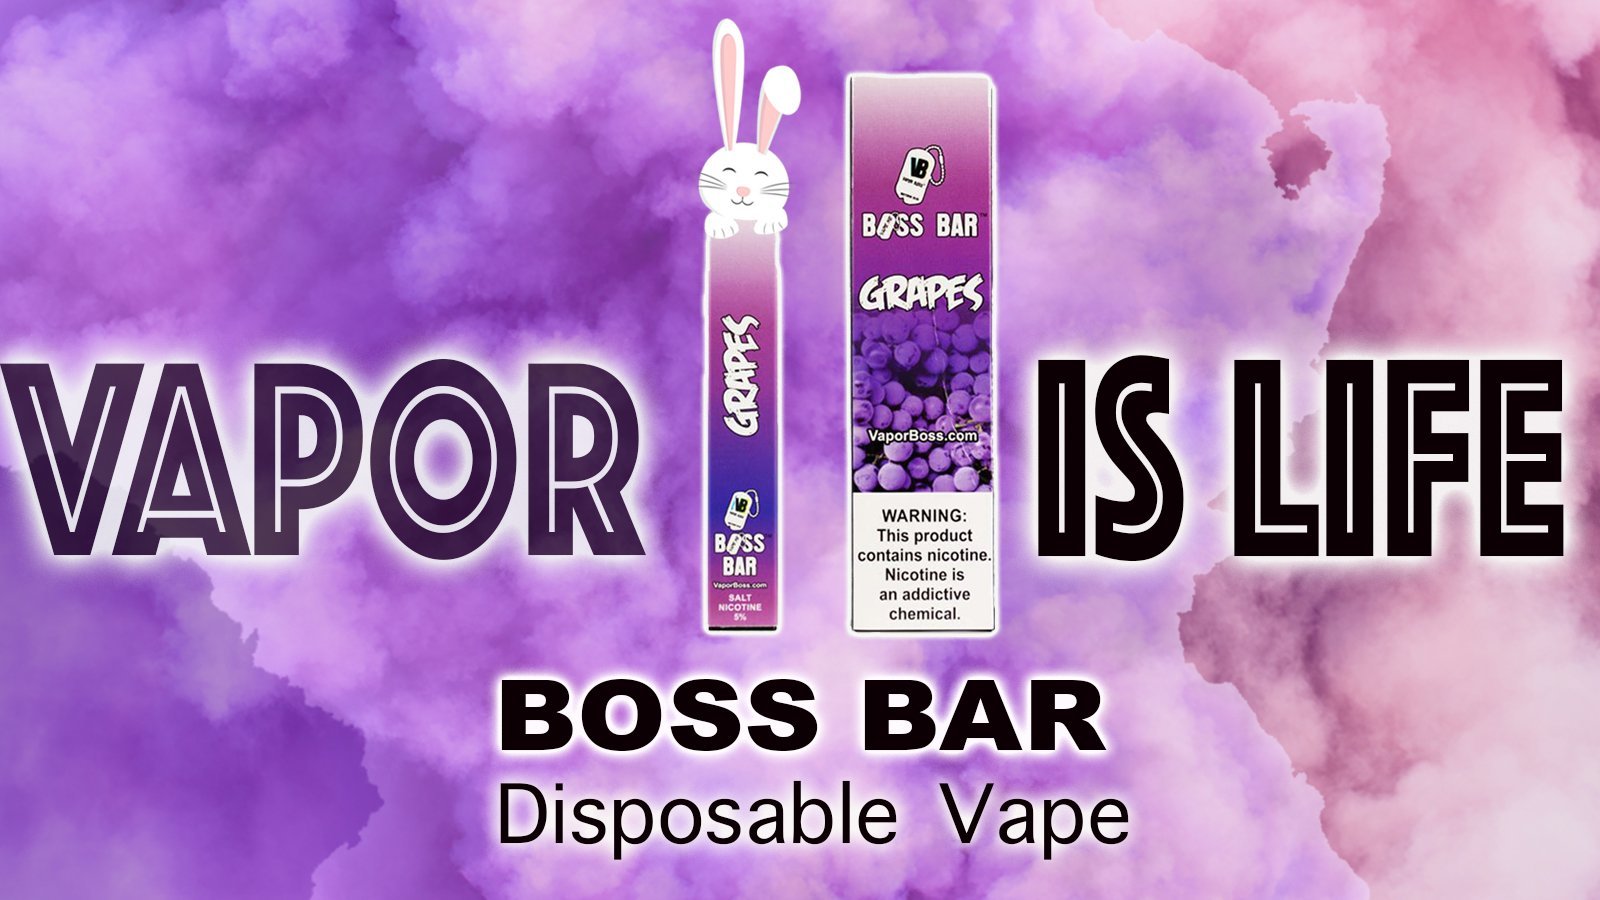 Your Trusted Online Vape Shop for Quality Products and Affordable Prices